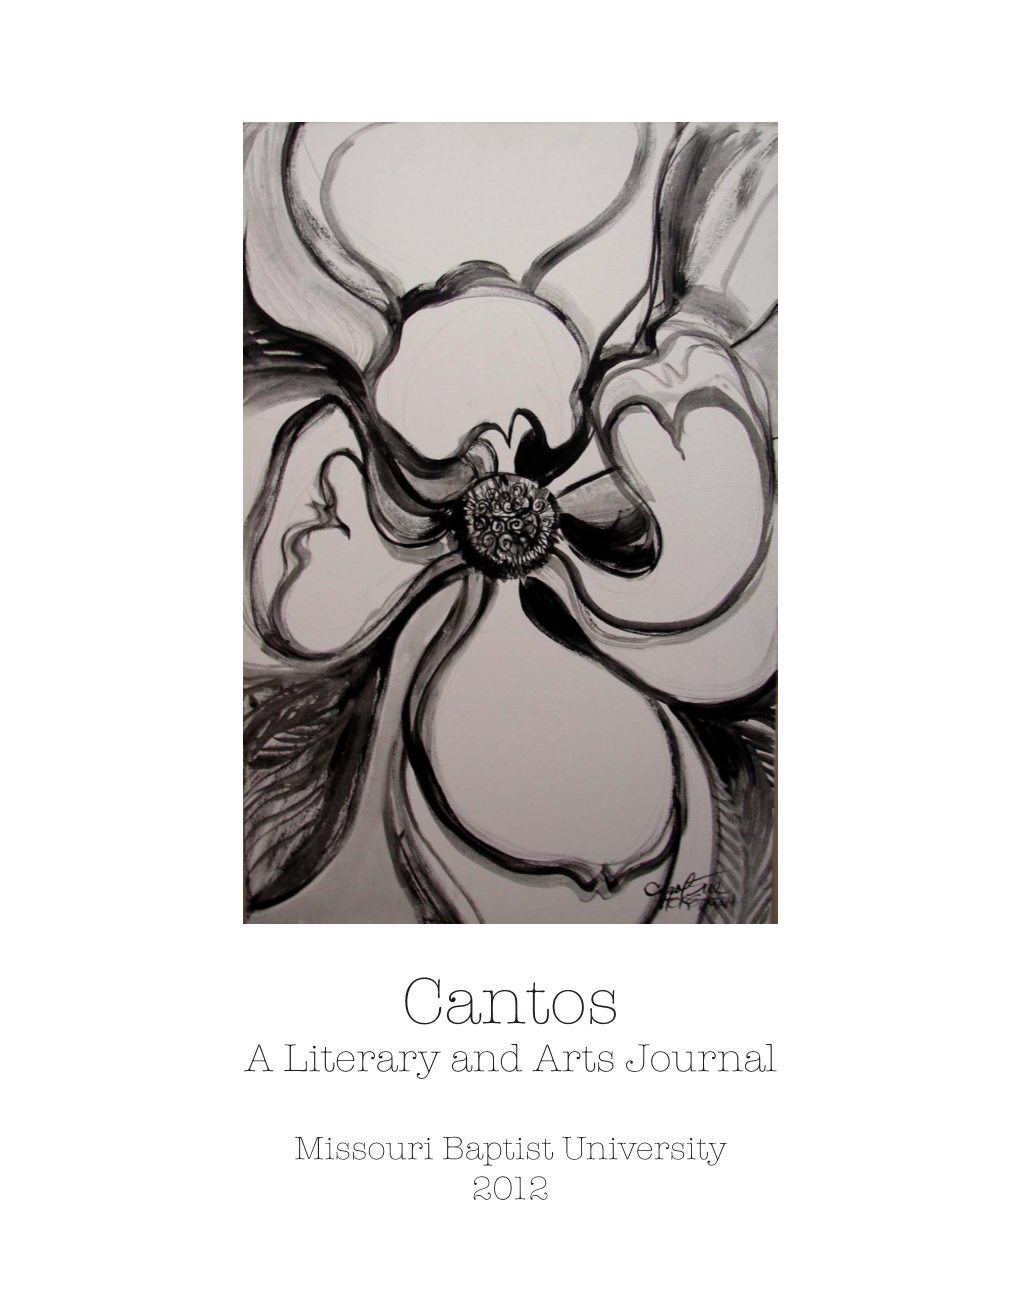 Cantos: a Literary and Arts Journal